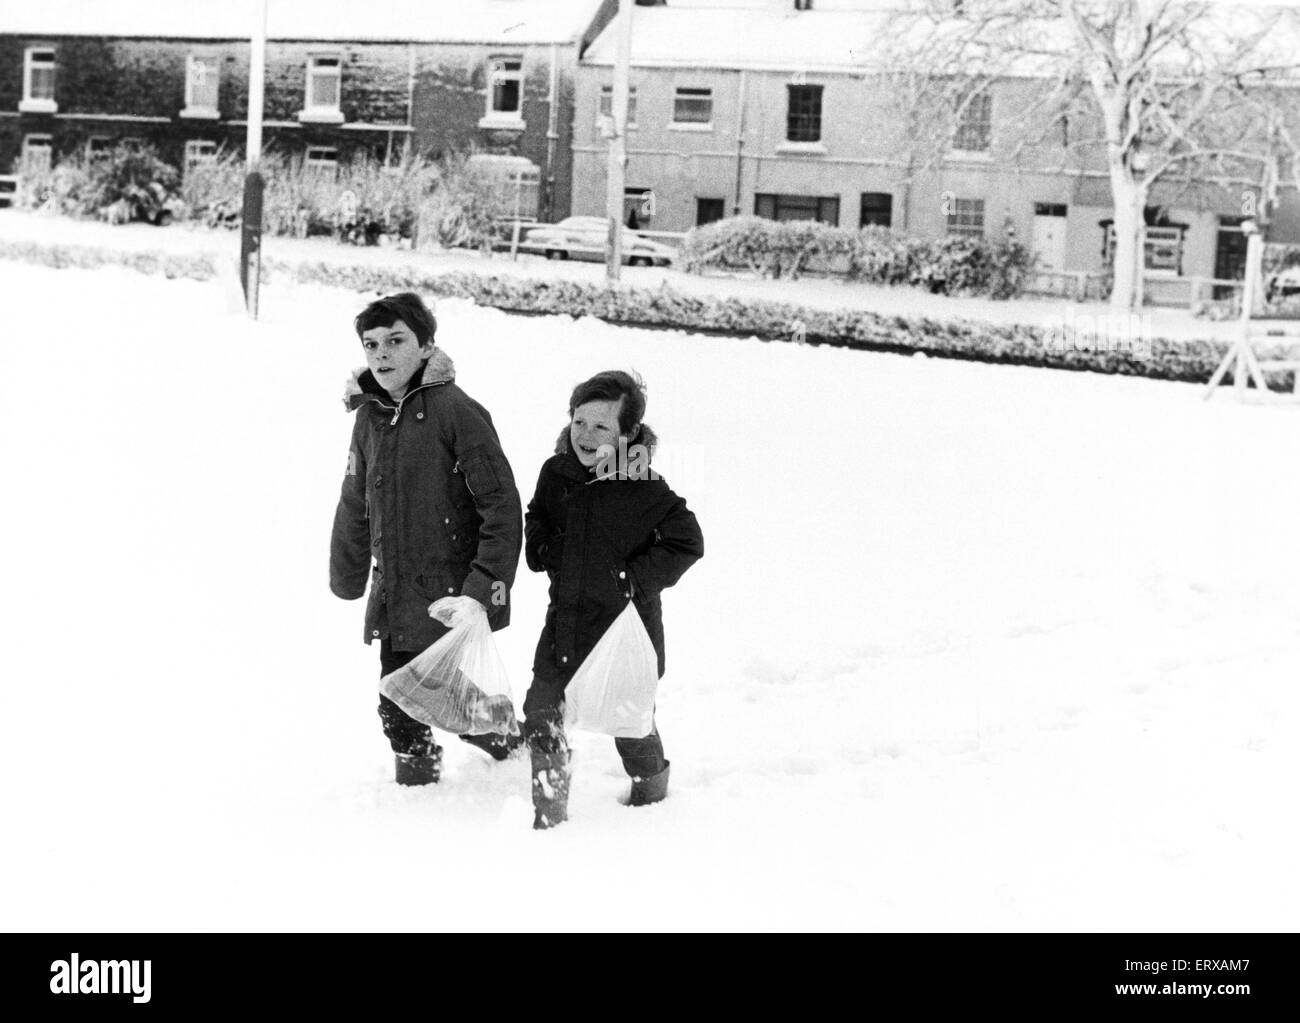 Christian Clapton (left) and Paul Isbel (right) trudge through the thick snow to get to school at Magrove Park, Middlesbrough. 24th January 1984. Stock Photo